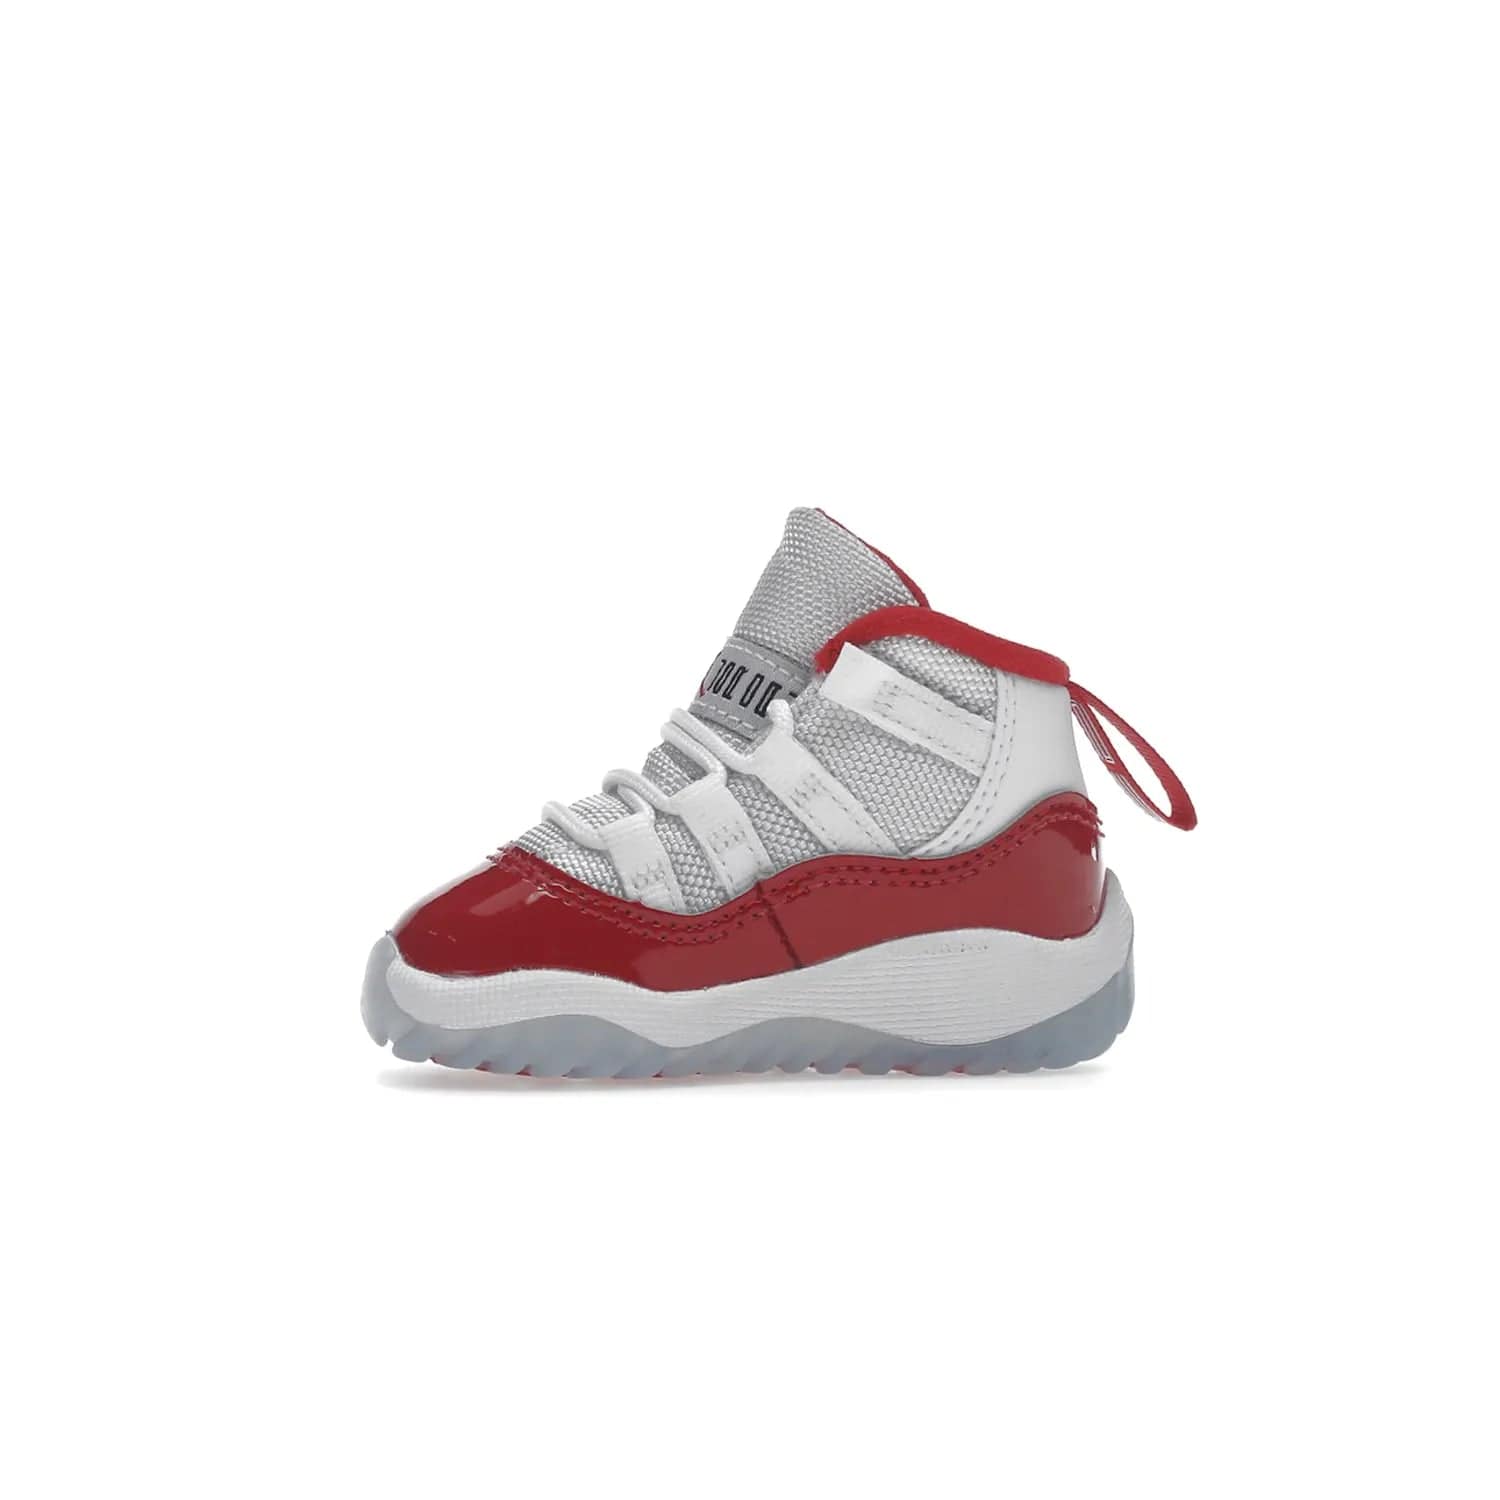 Jordan 11 Retro Cherry (2022) (TD) - Image 18 - Only at www.BallersClubKickz.com - Timeless classic. Air Jordan 11 Retro Cherry 2022 TD combines mesh, leather & suede for a unique look. White upper with varsity red suede. Jumpman logo on collar & tongue. Available Dec 10th, priced at $80.